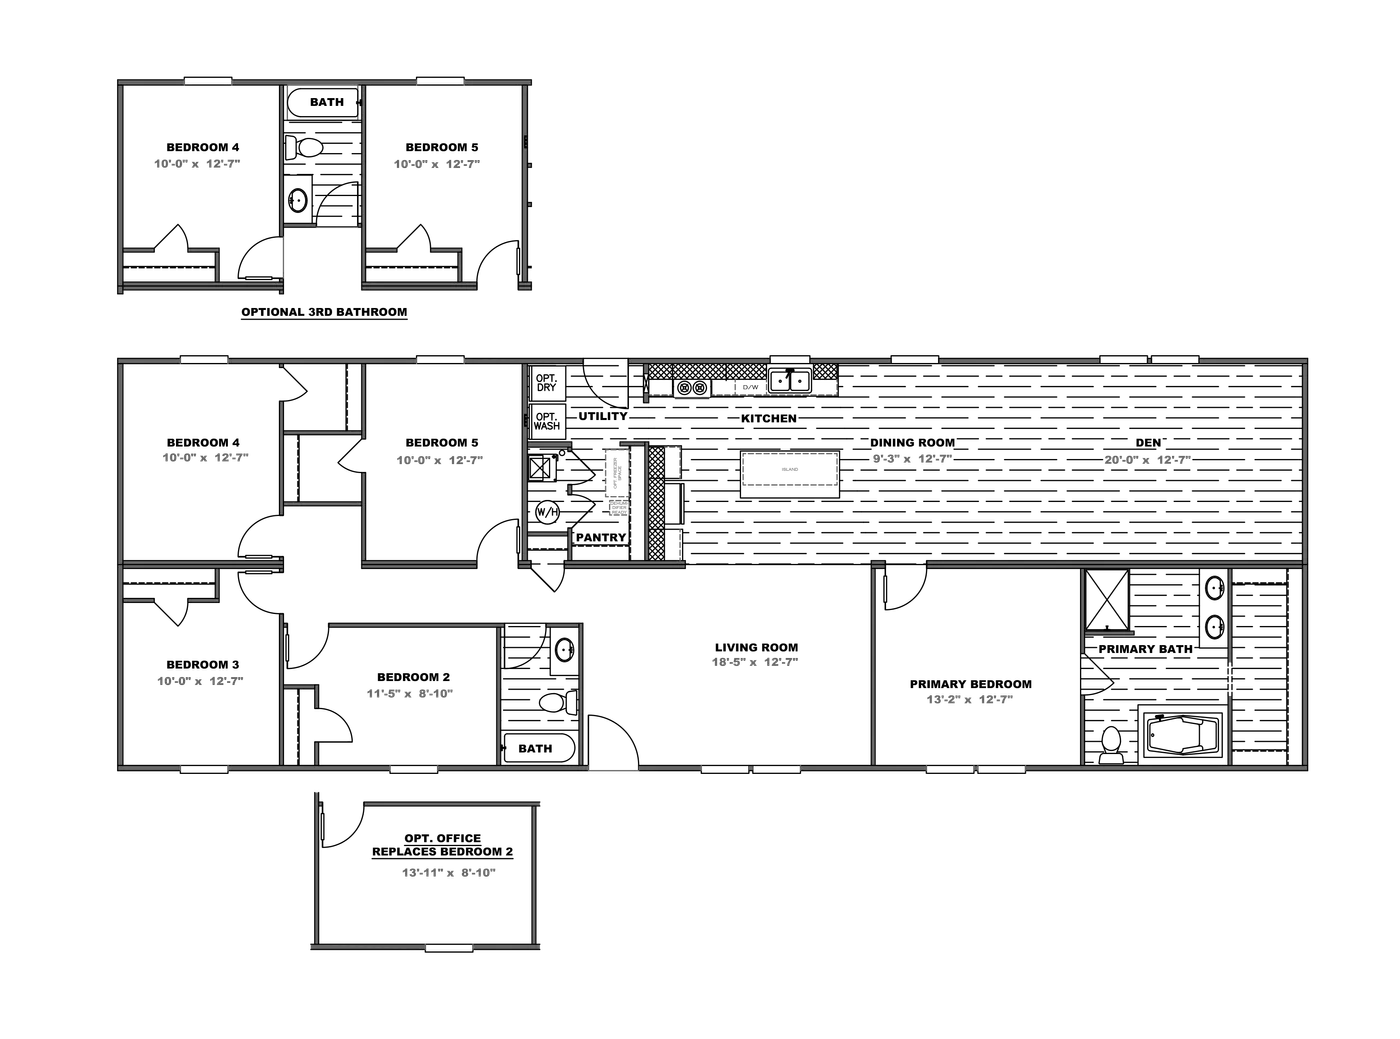 The THE EAGLE 76 Floor Plan. This Manufactured Mobile Home features 5 bedrooms and 2 baths.